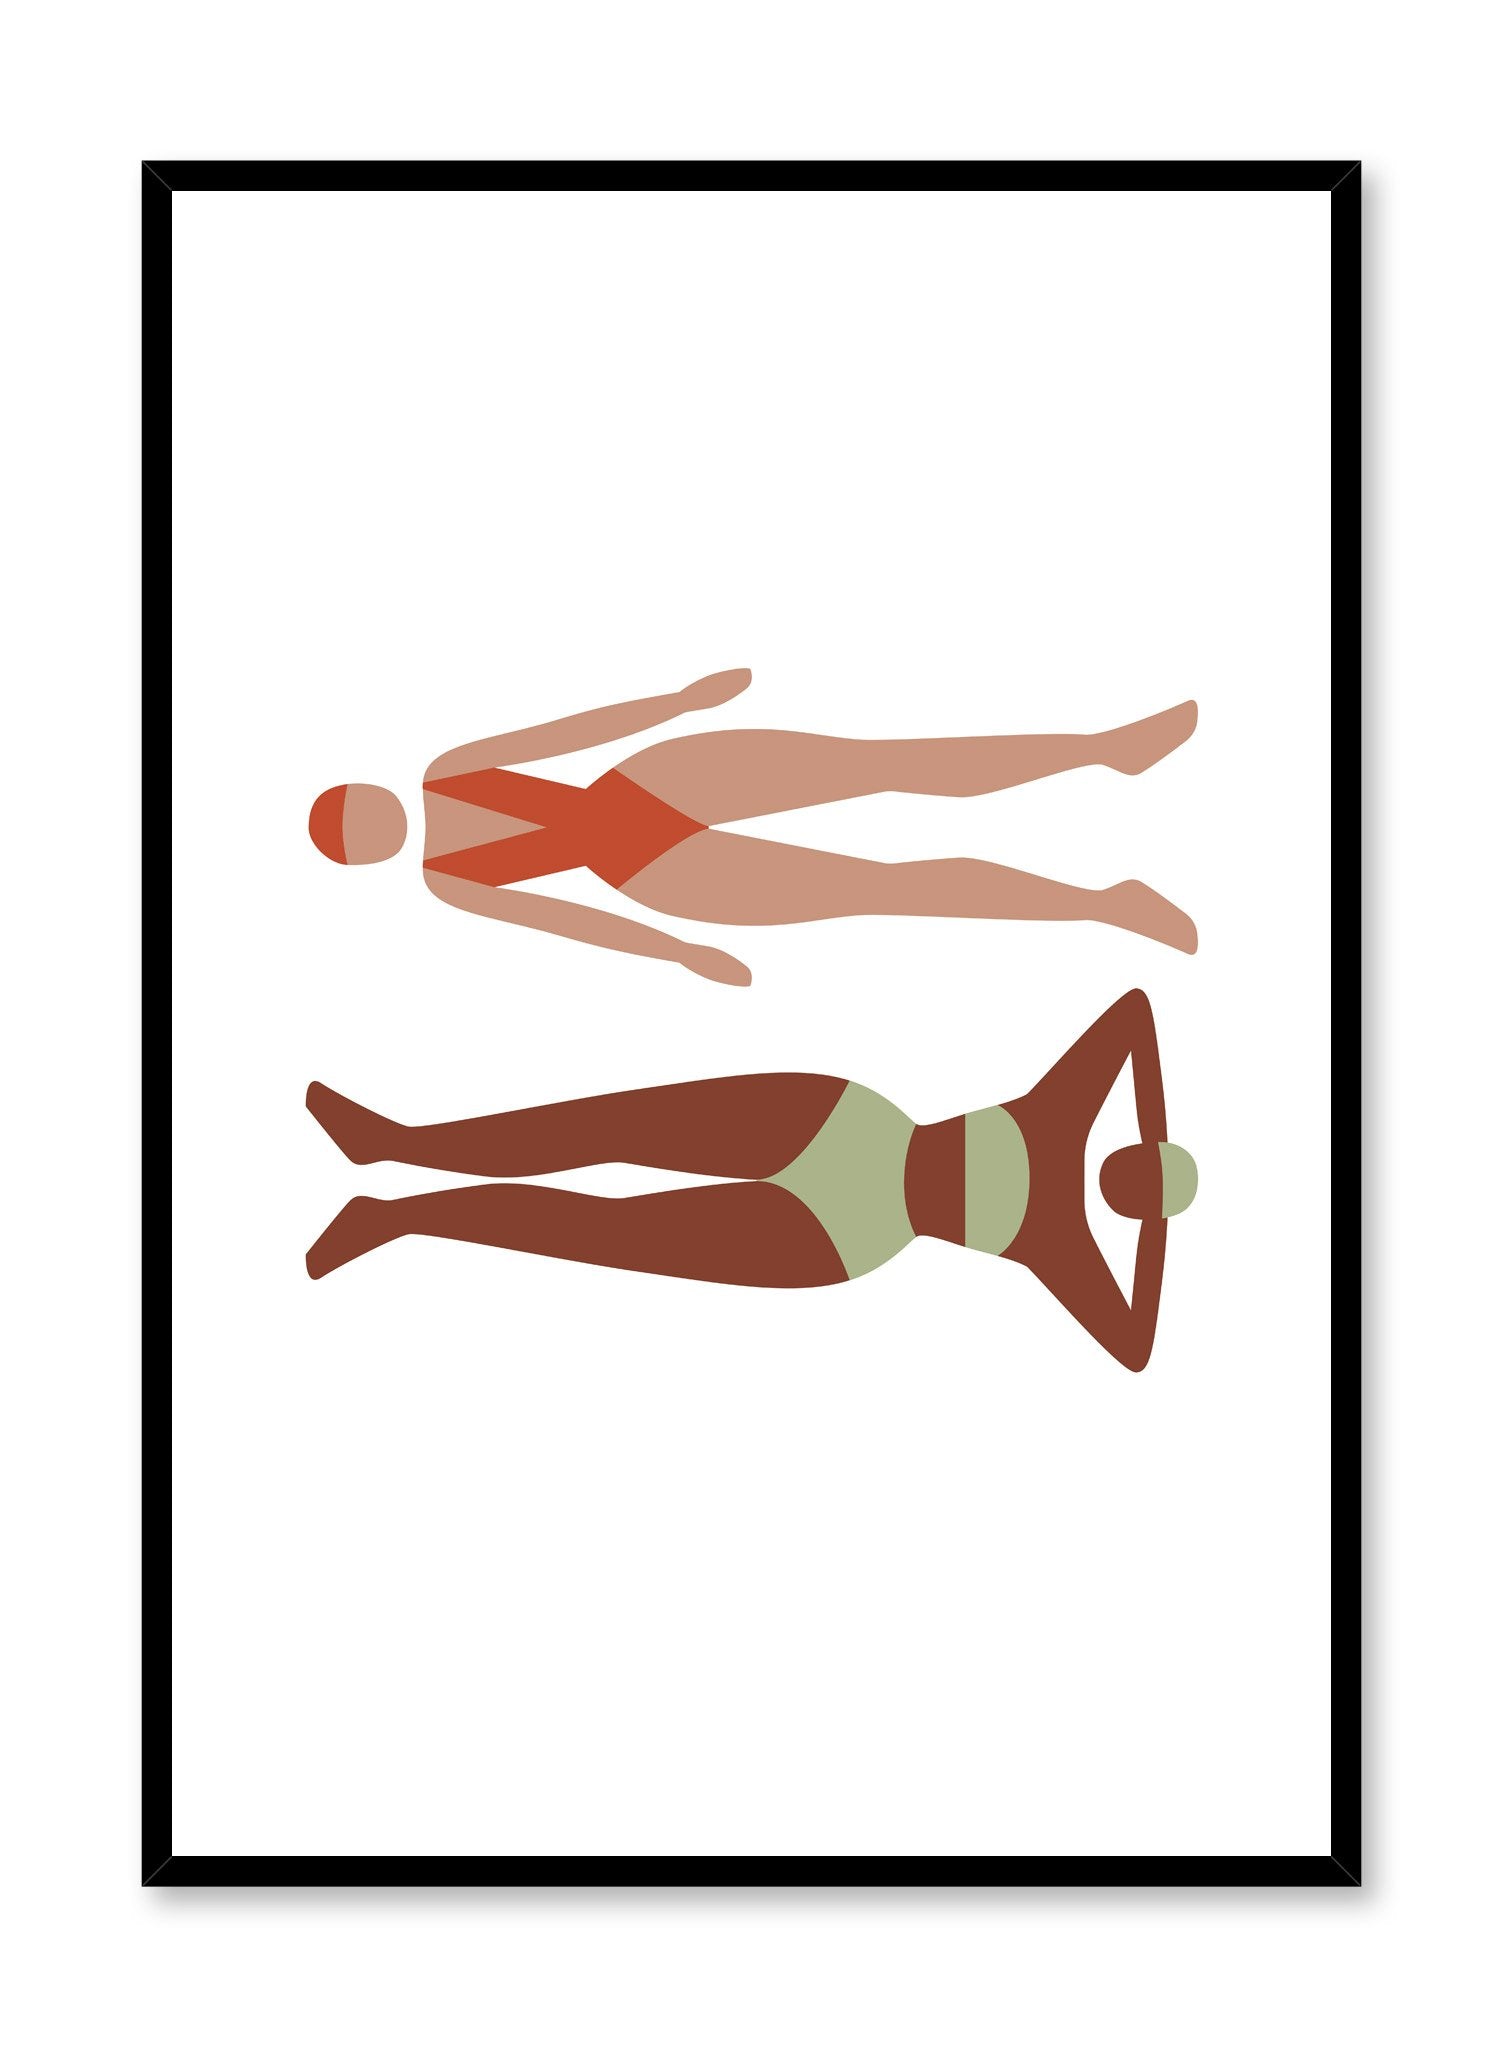 Modern minimalist poster by Opposite Wall with illustration of girls sunbathing